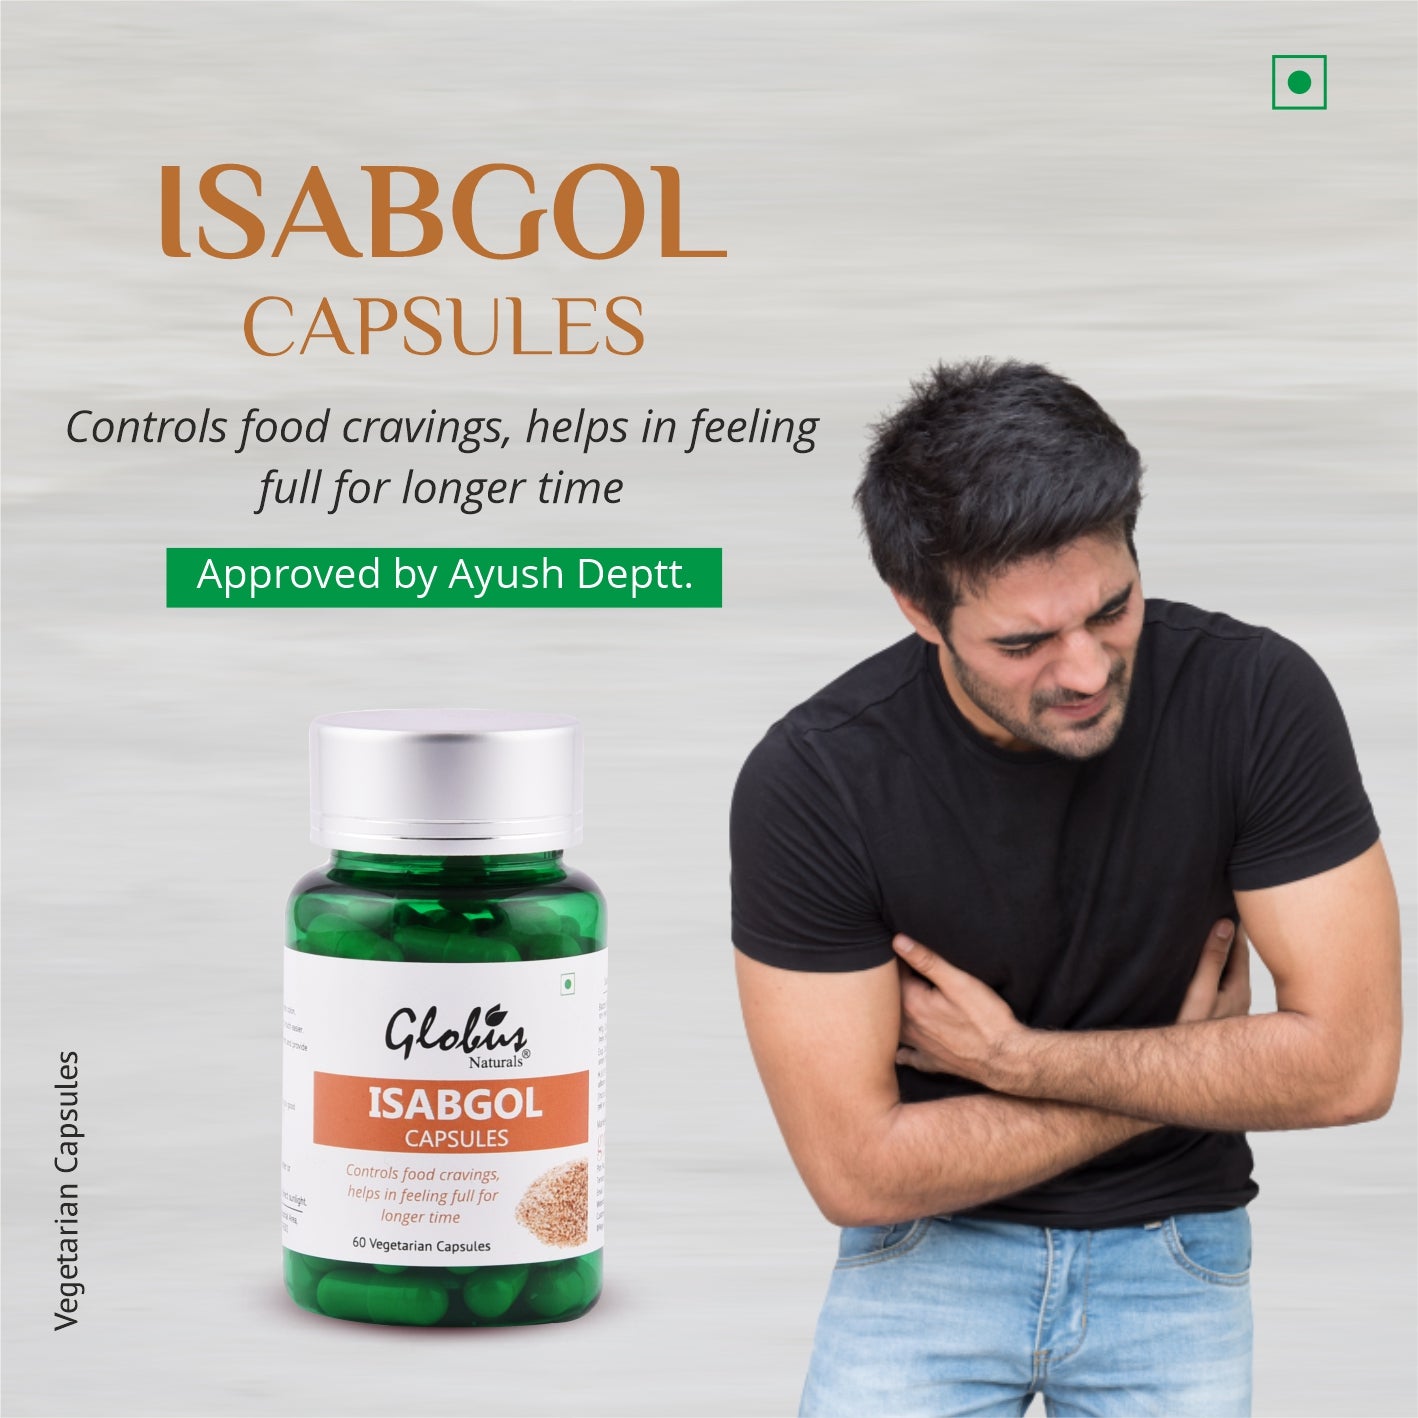 Top 12 Isabgol Benefits with Precautions, Dosage, Side Effects